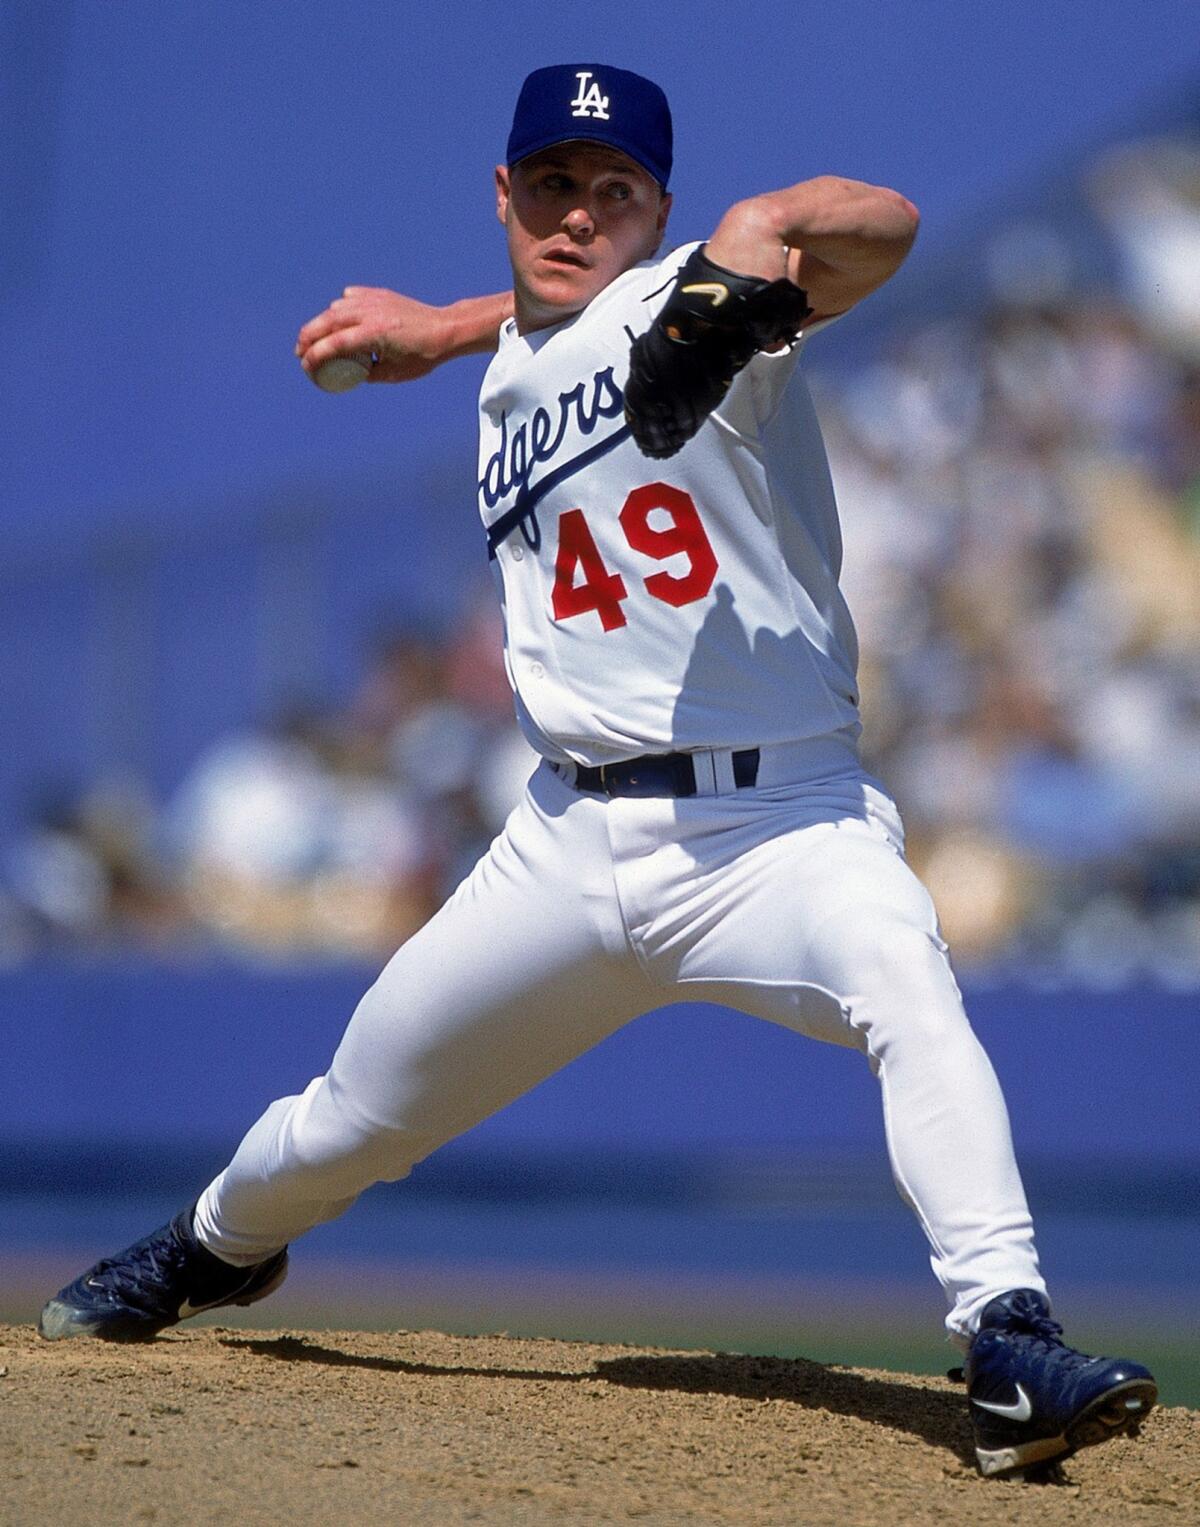 Former Dodgers pitcher Matt Herges says players on steroids need to do themselves a favor and admit to using performance-enhancing drugs.